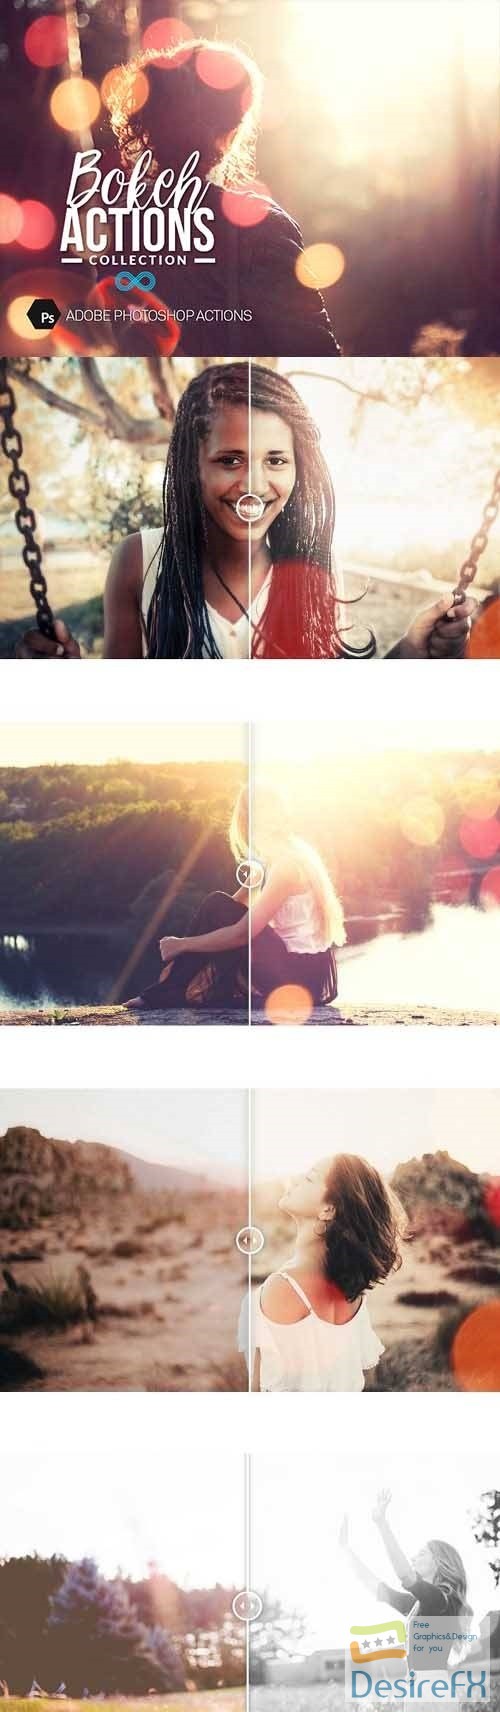 Photonify - Bokeh Collection Photoshop Actions